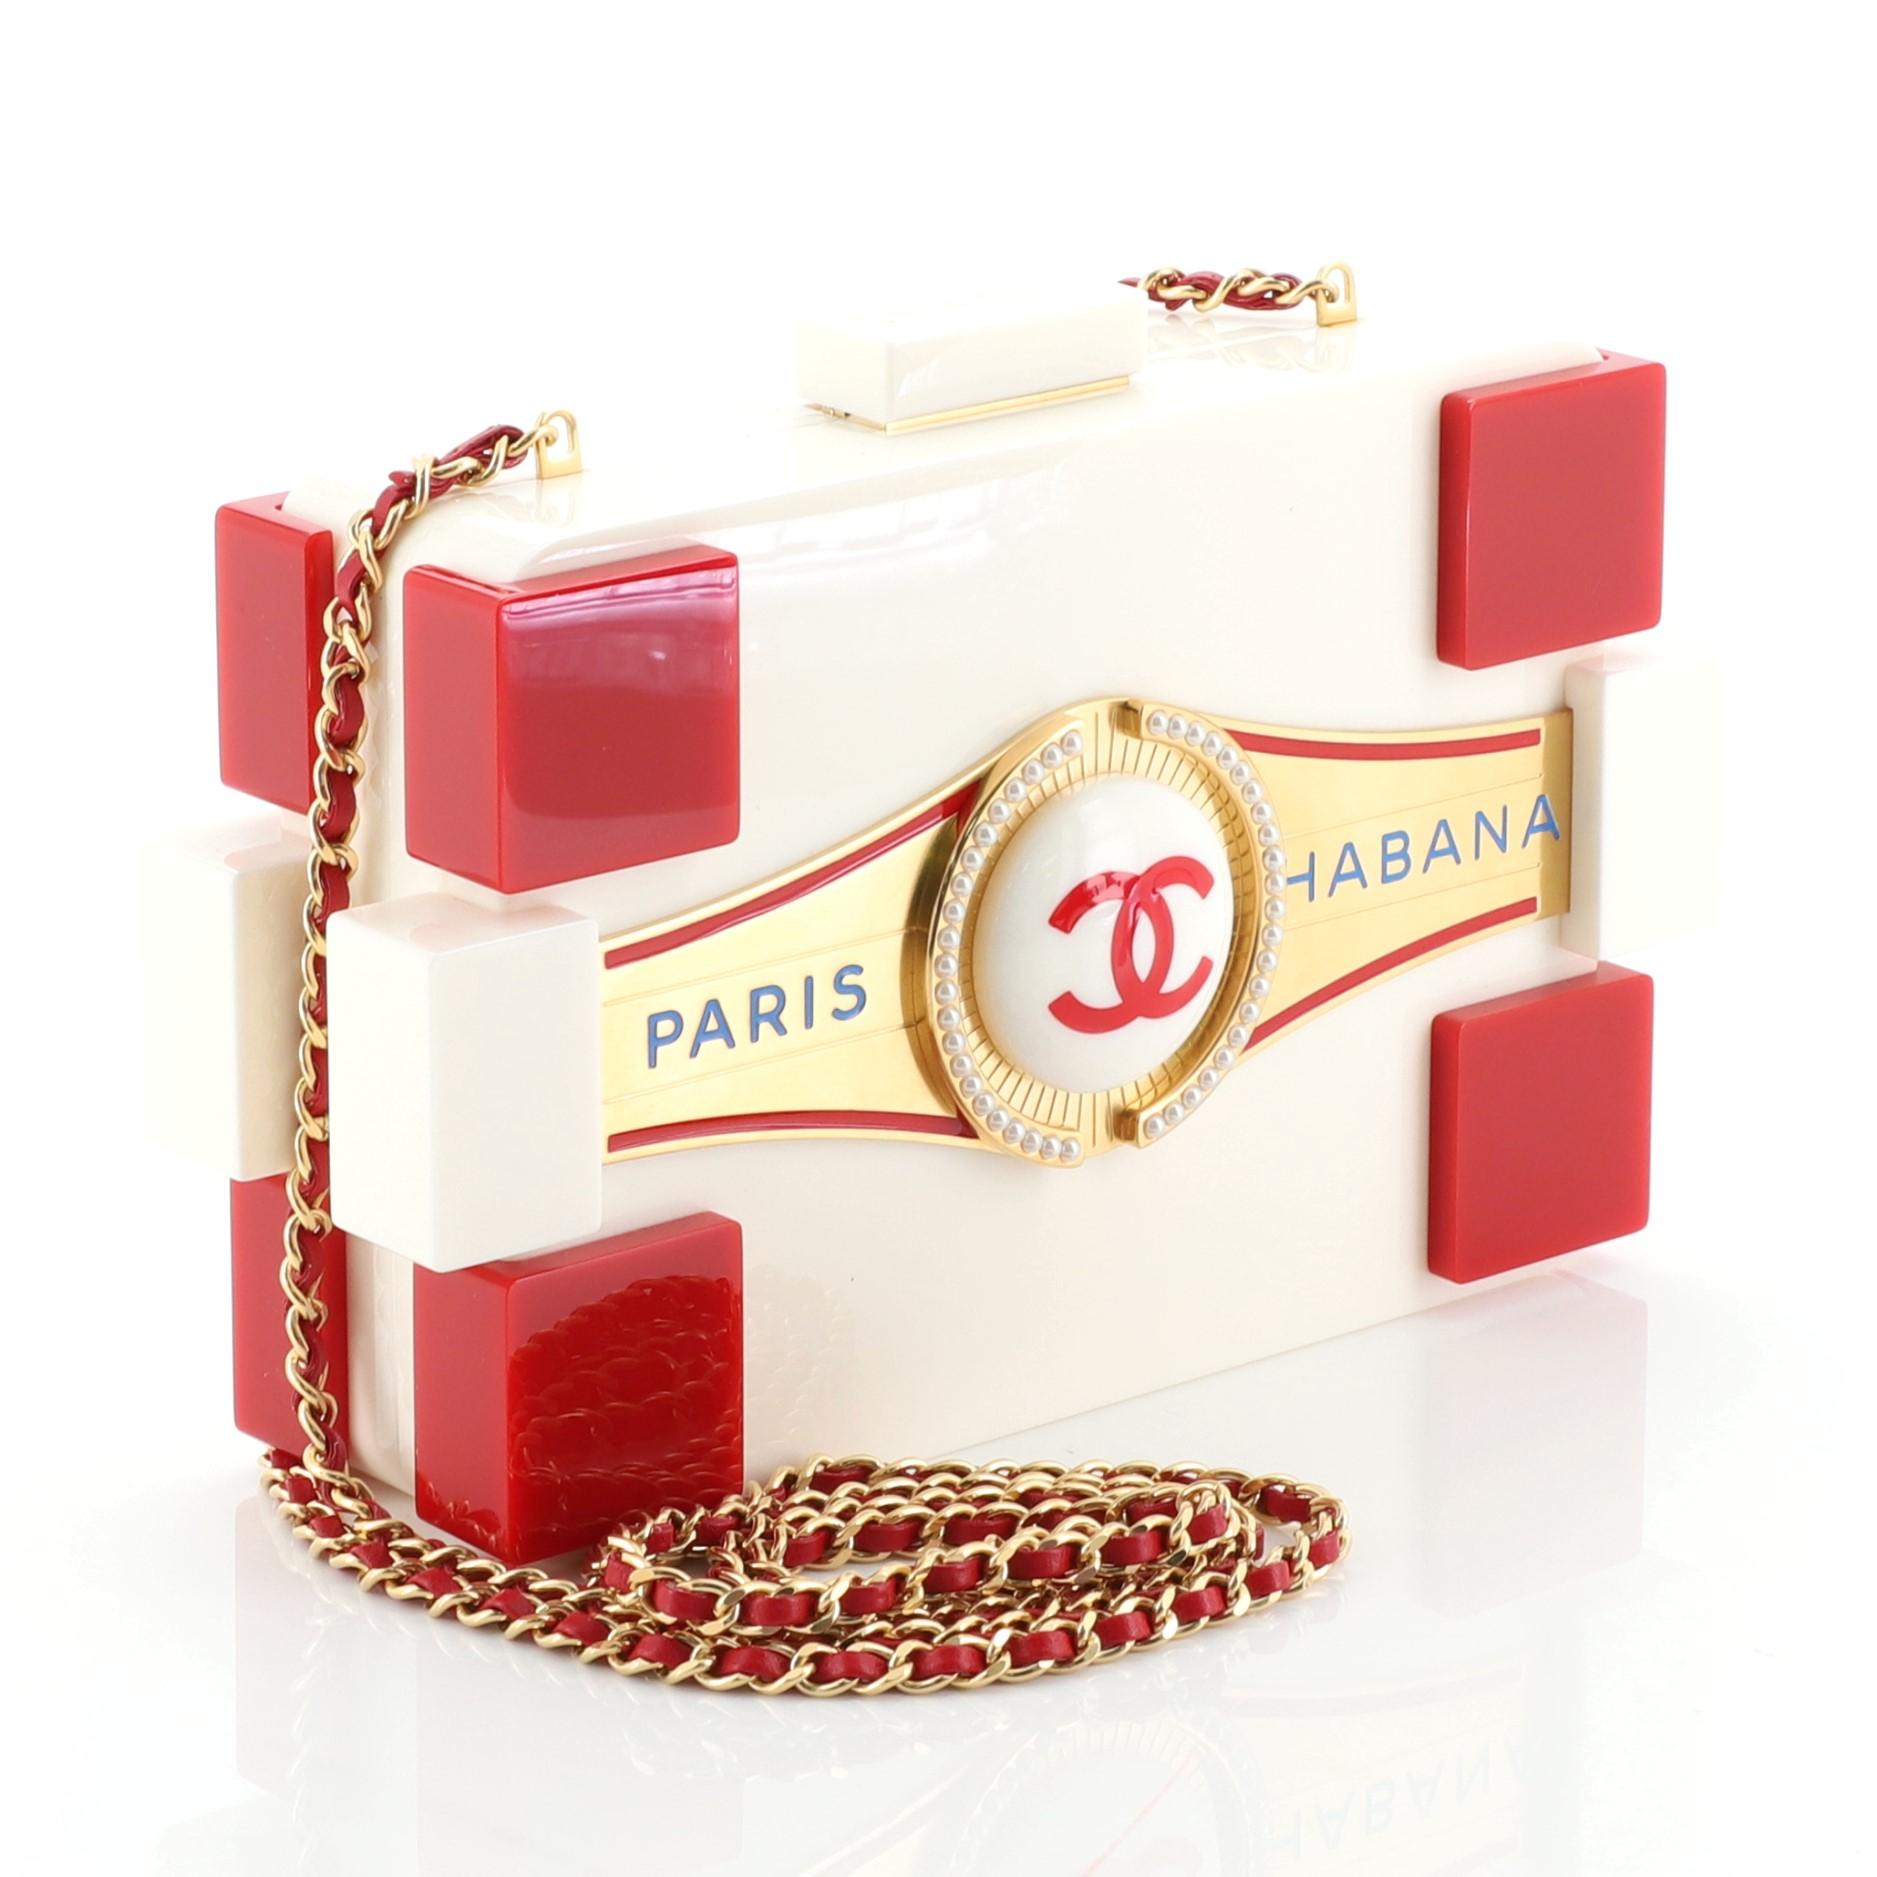 This Chanel Paris-Habana Lego Clutch Plexiglass, crafted from red and white plexiglass, features chain link strap, CC logo at the front, and matte gold tone hardware. It opens to a gold leather interior. Authenticity code reads: 23525249 

Estimated